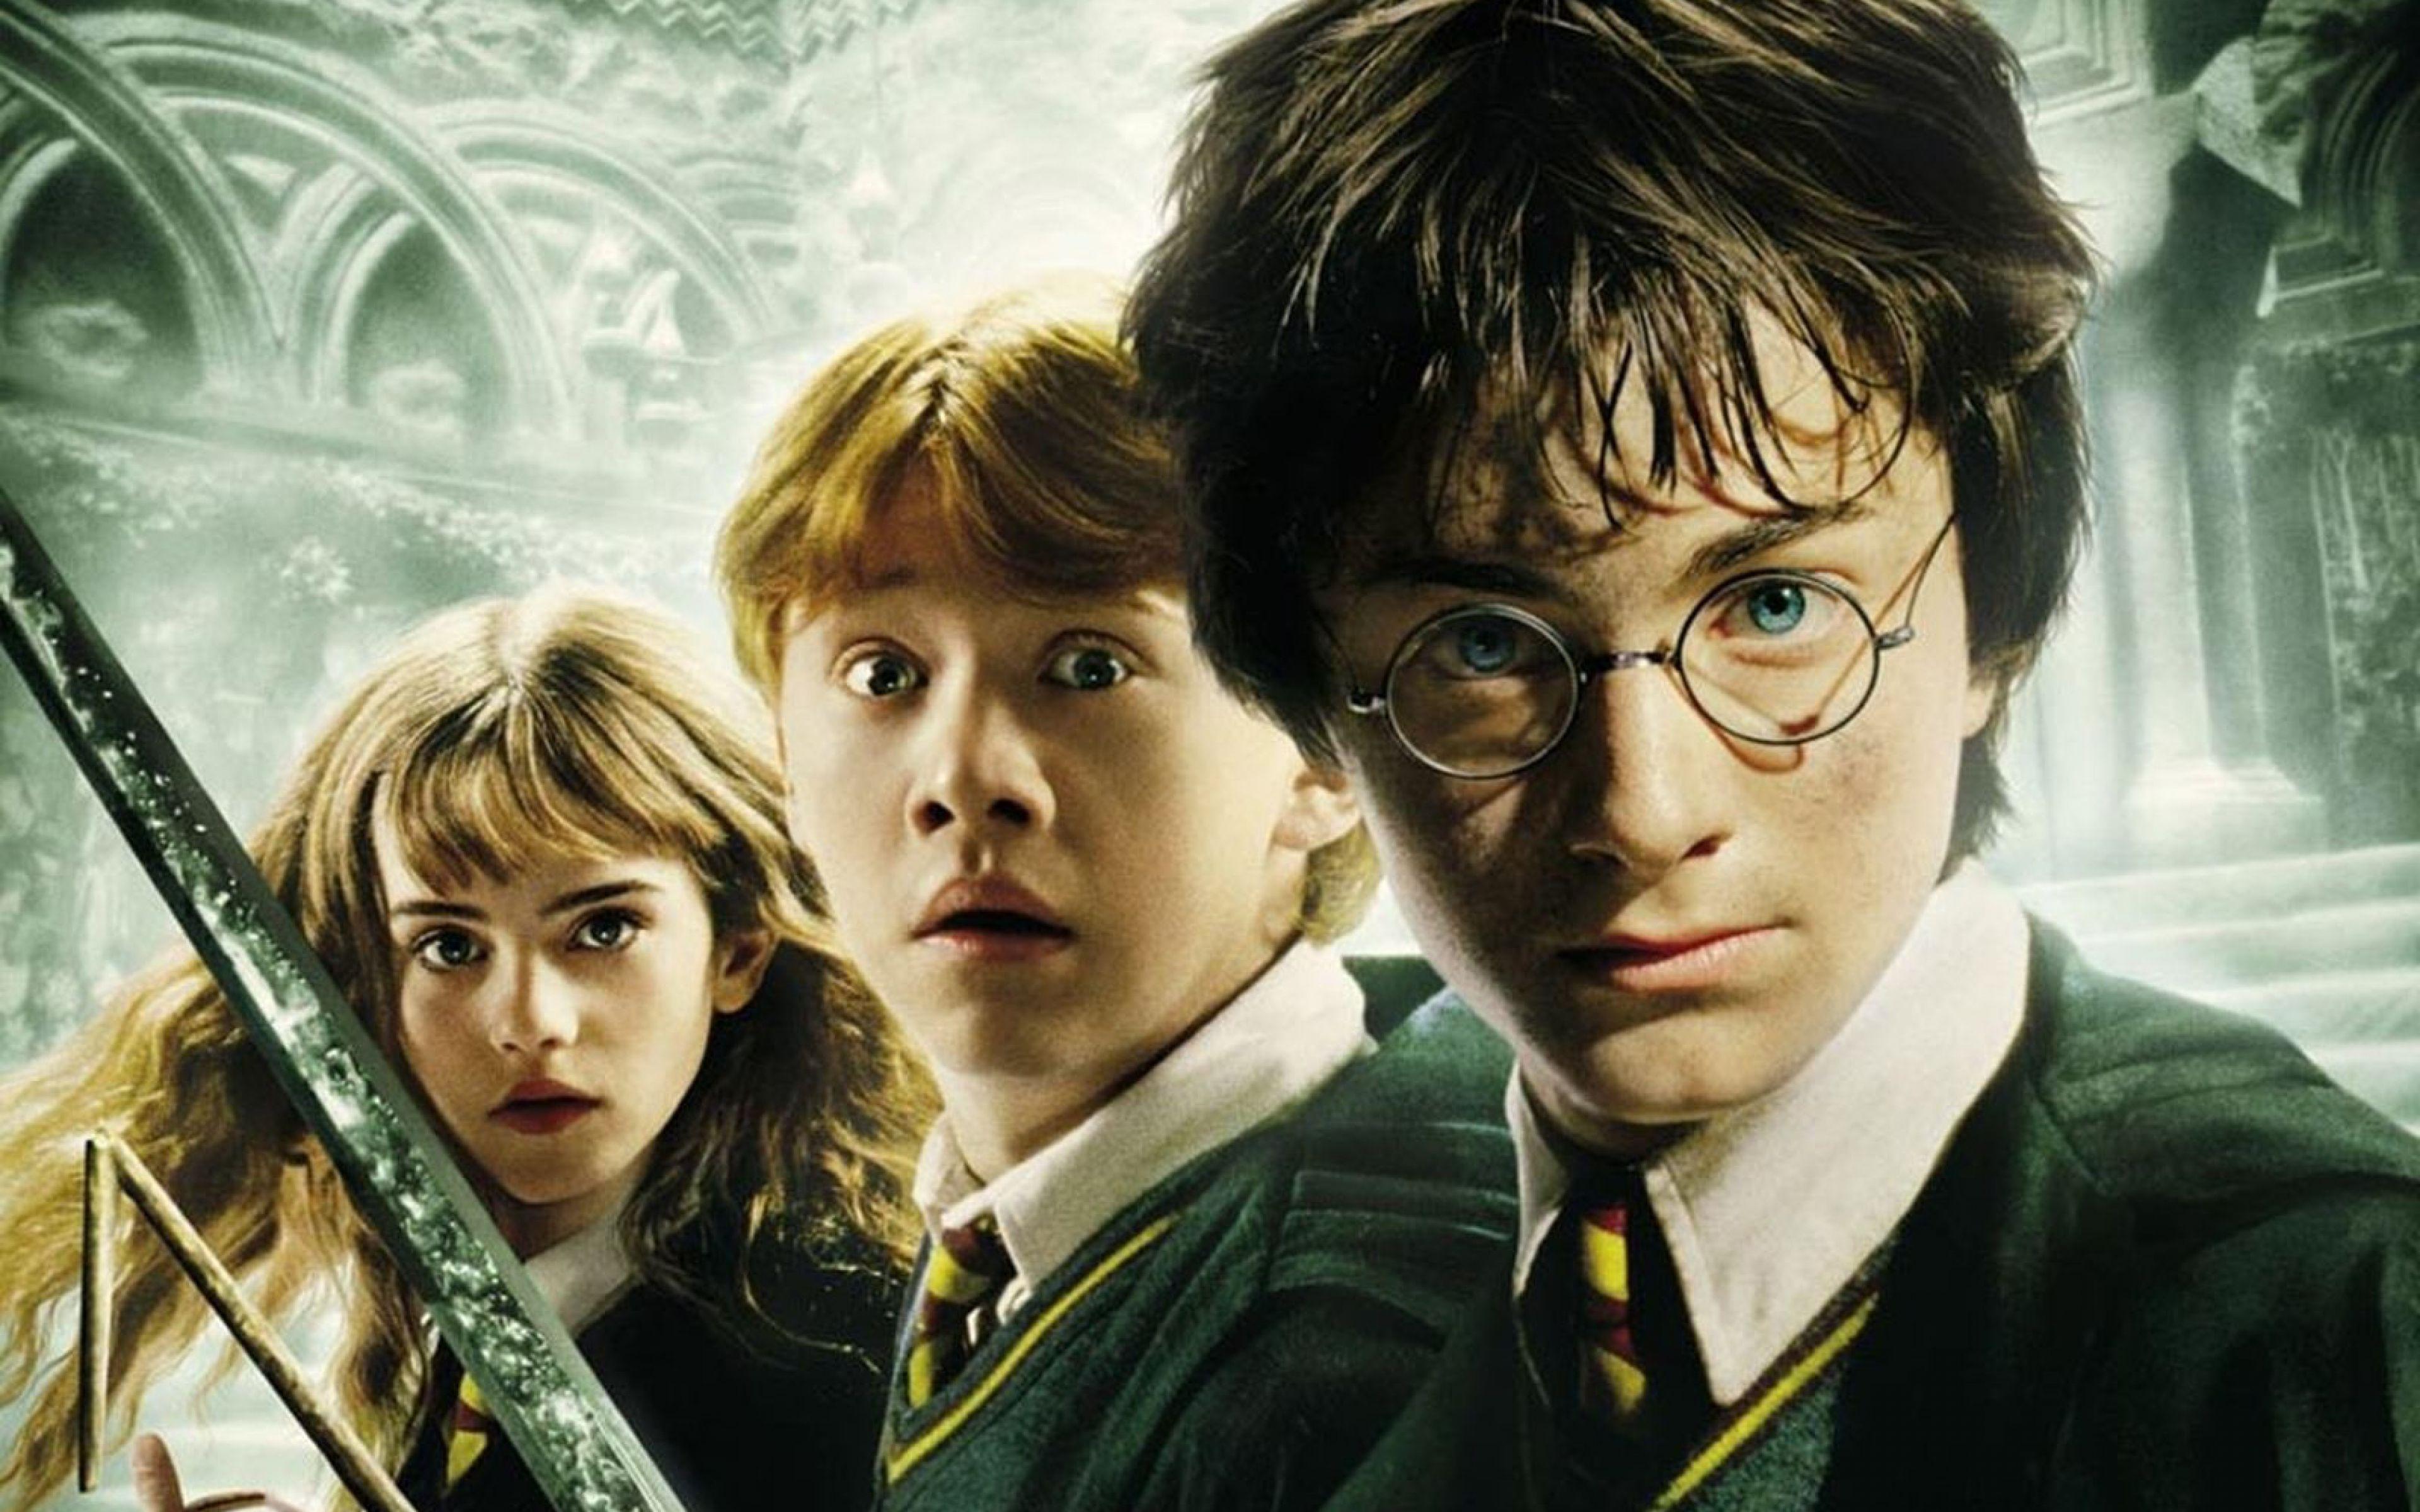 Download Wallpaper 3840x2400 Harry potter and the chamber